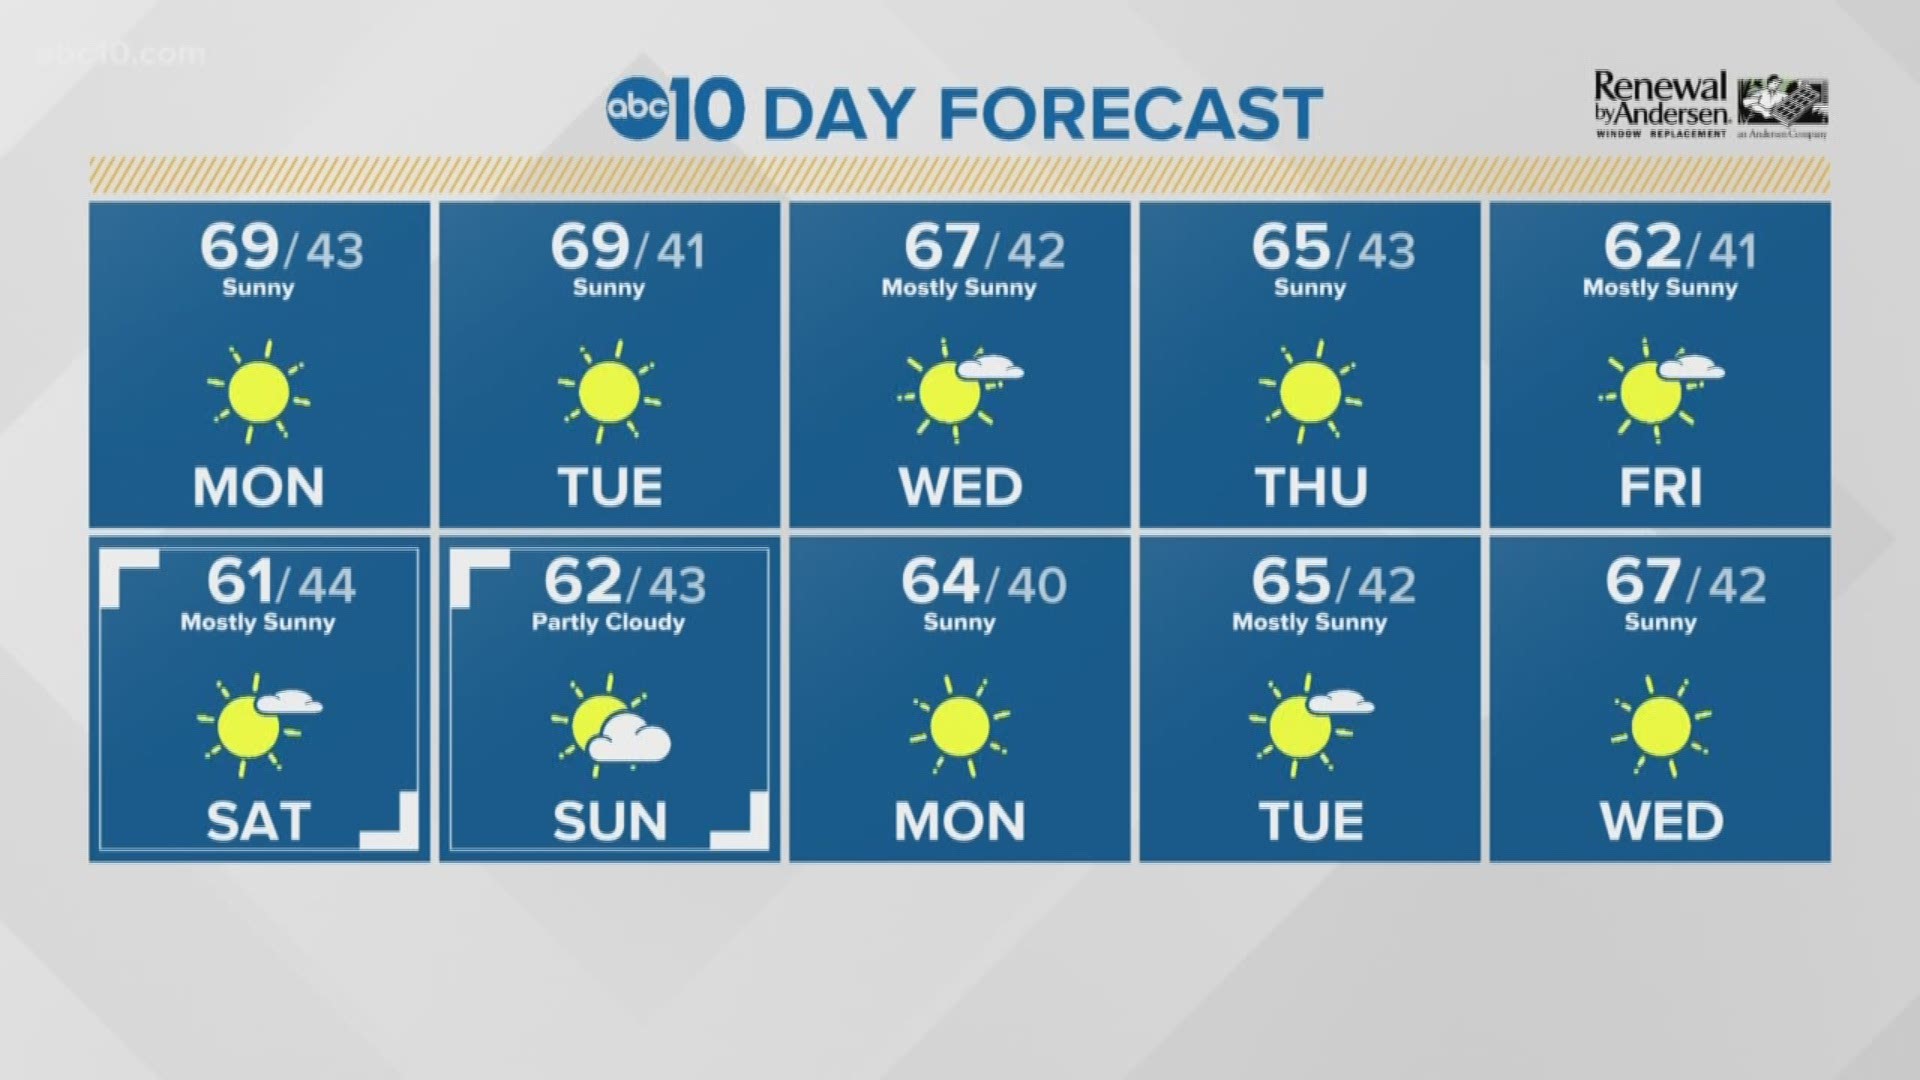 Get the latest forecast from ABC10 on TV, online and on your streaming devices throughout the day.